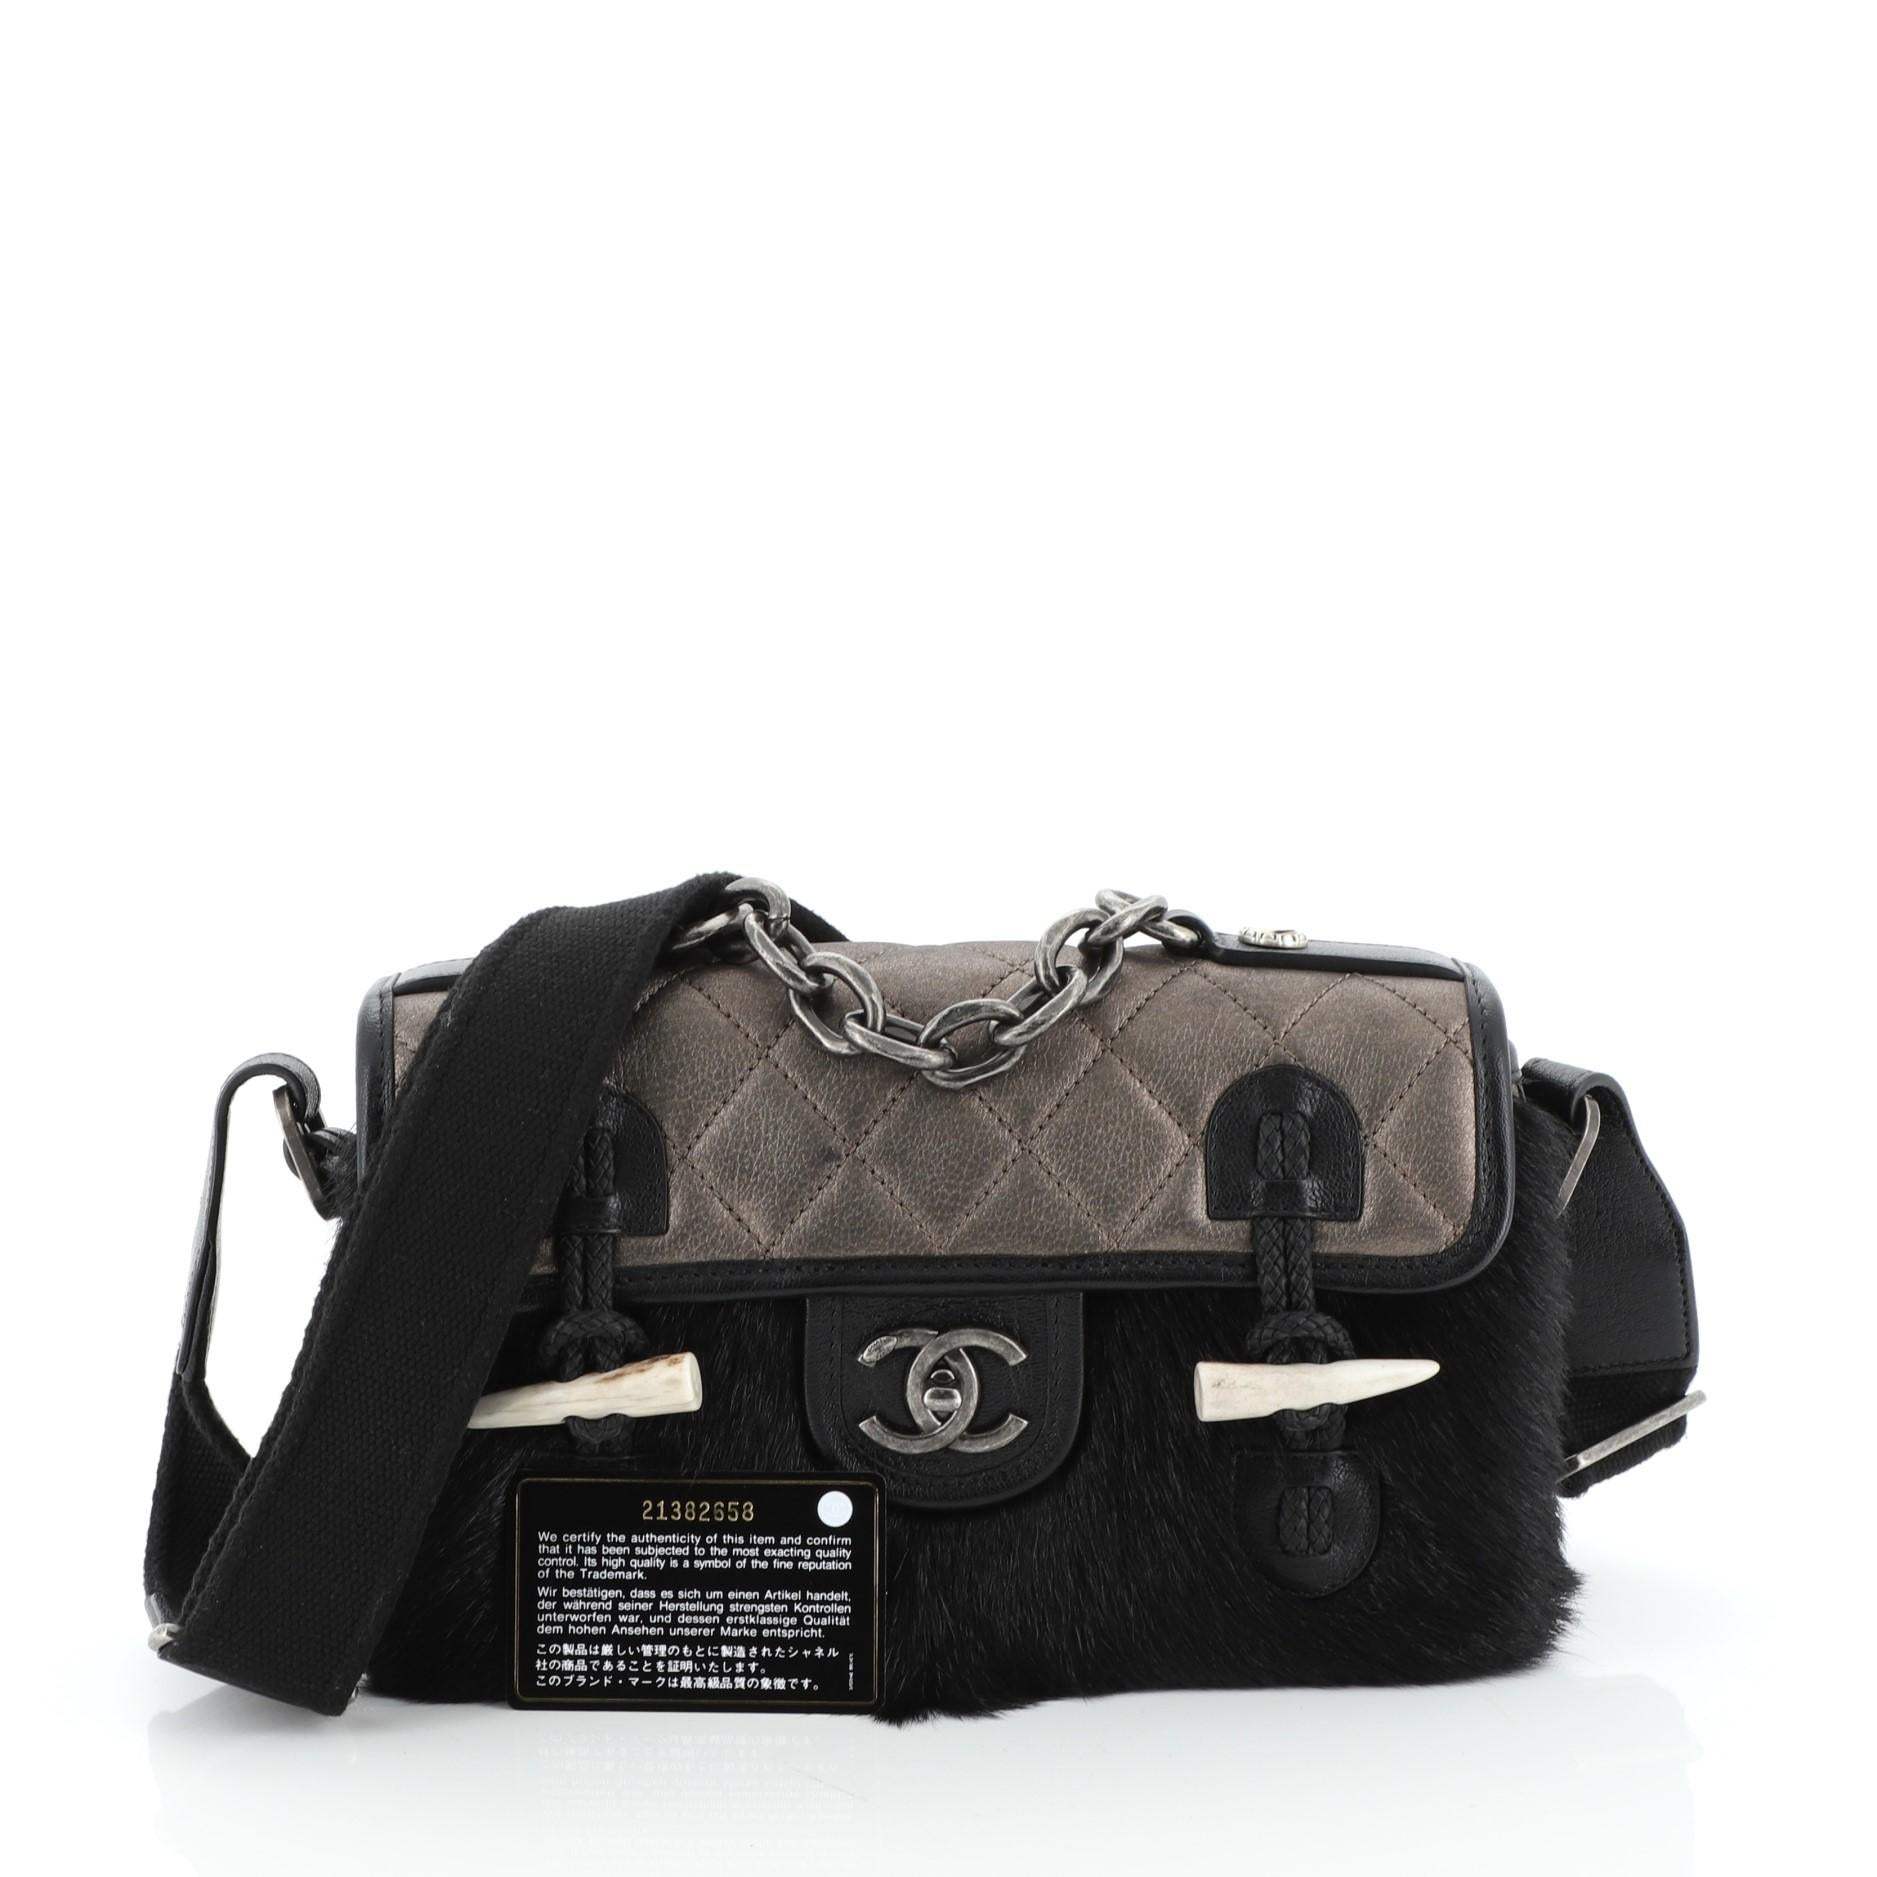 This Chanel Paris-Dallas Cowboy Messenger Bag Quilted Calfskin and Fur Small, crafted from gold quilted calfskin and black fur, features an adjustable strap, frontal flap, and gunmetal-tone hardware. Its CC turn-lock closure opens to a red fabric